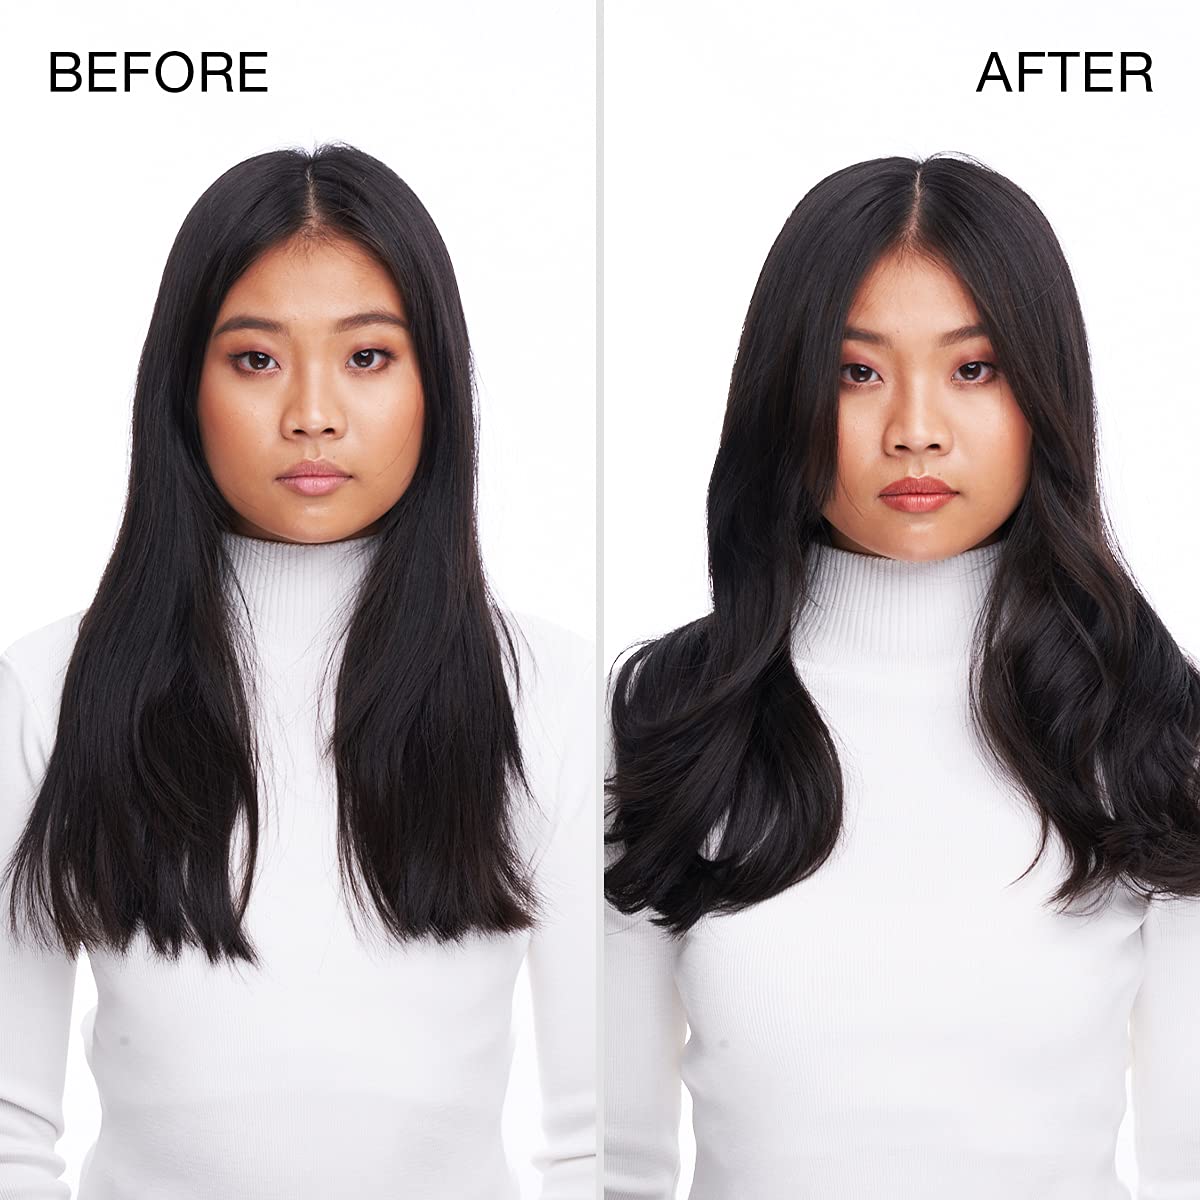 Kenra Blow Dry Spray Before and After